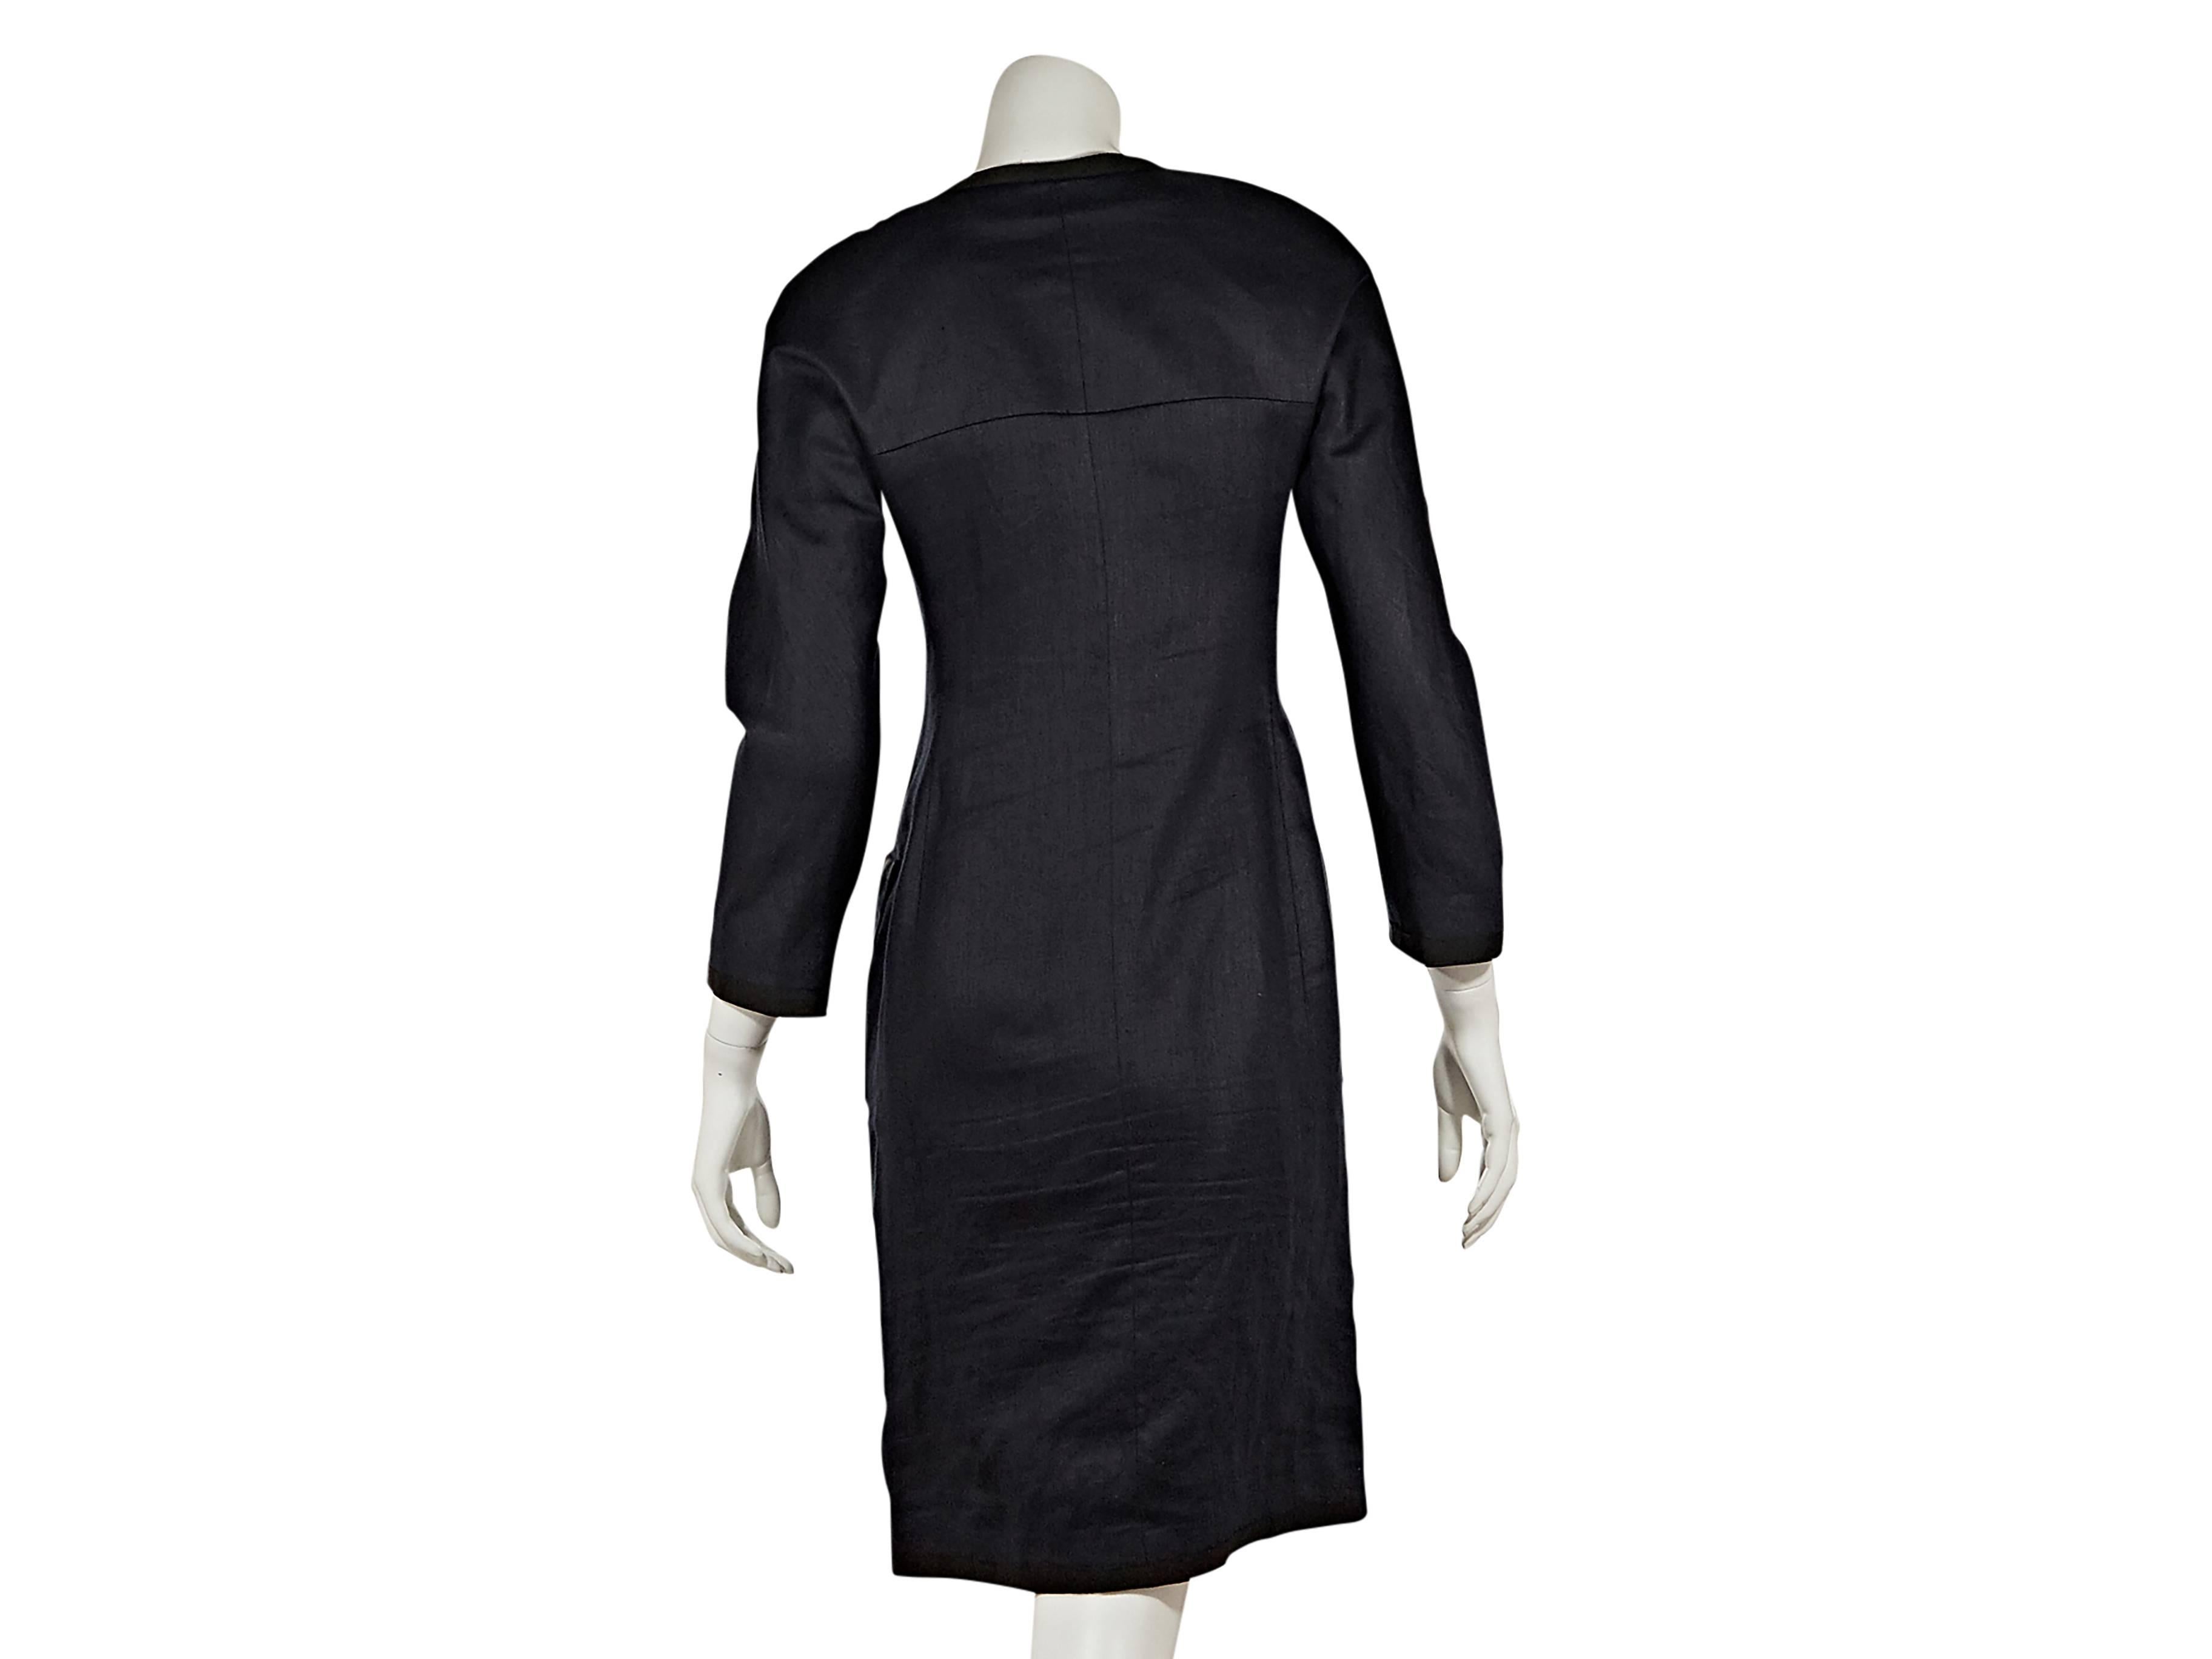 Black linen button-front dress by Chanel.  Jewelneck.  Three-quarter length sleeves.  Goldtone buttons.  Four front patch pockets.